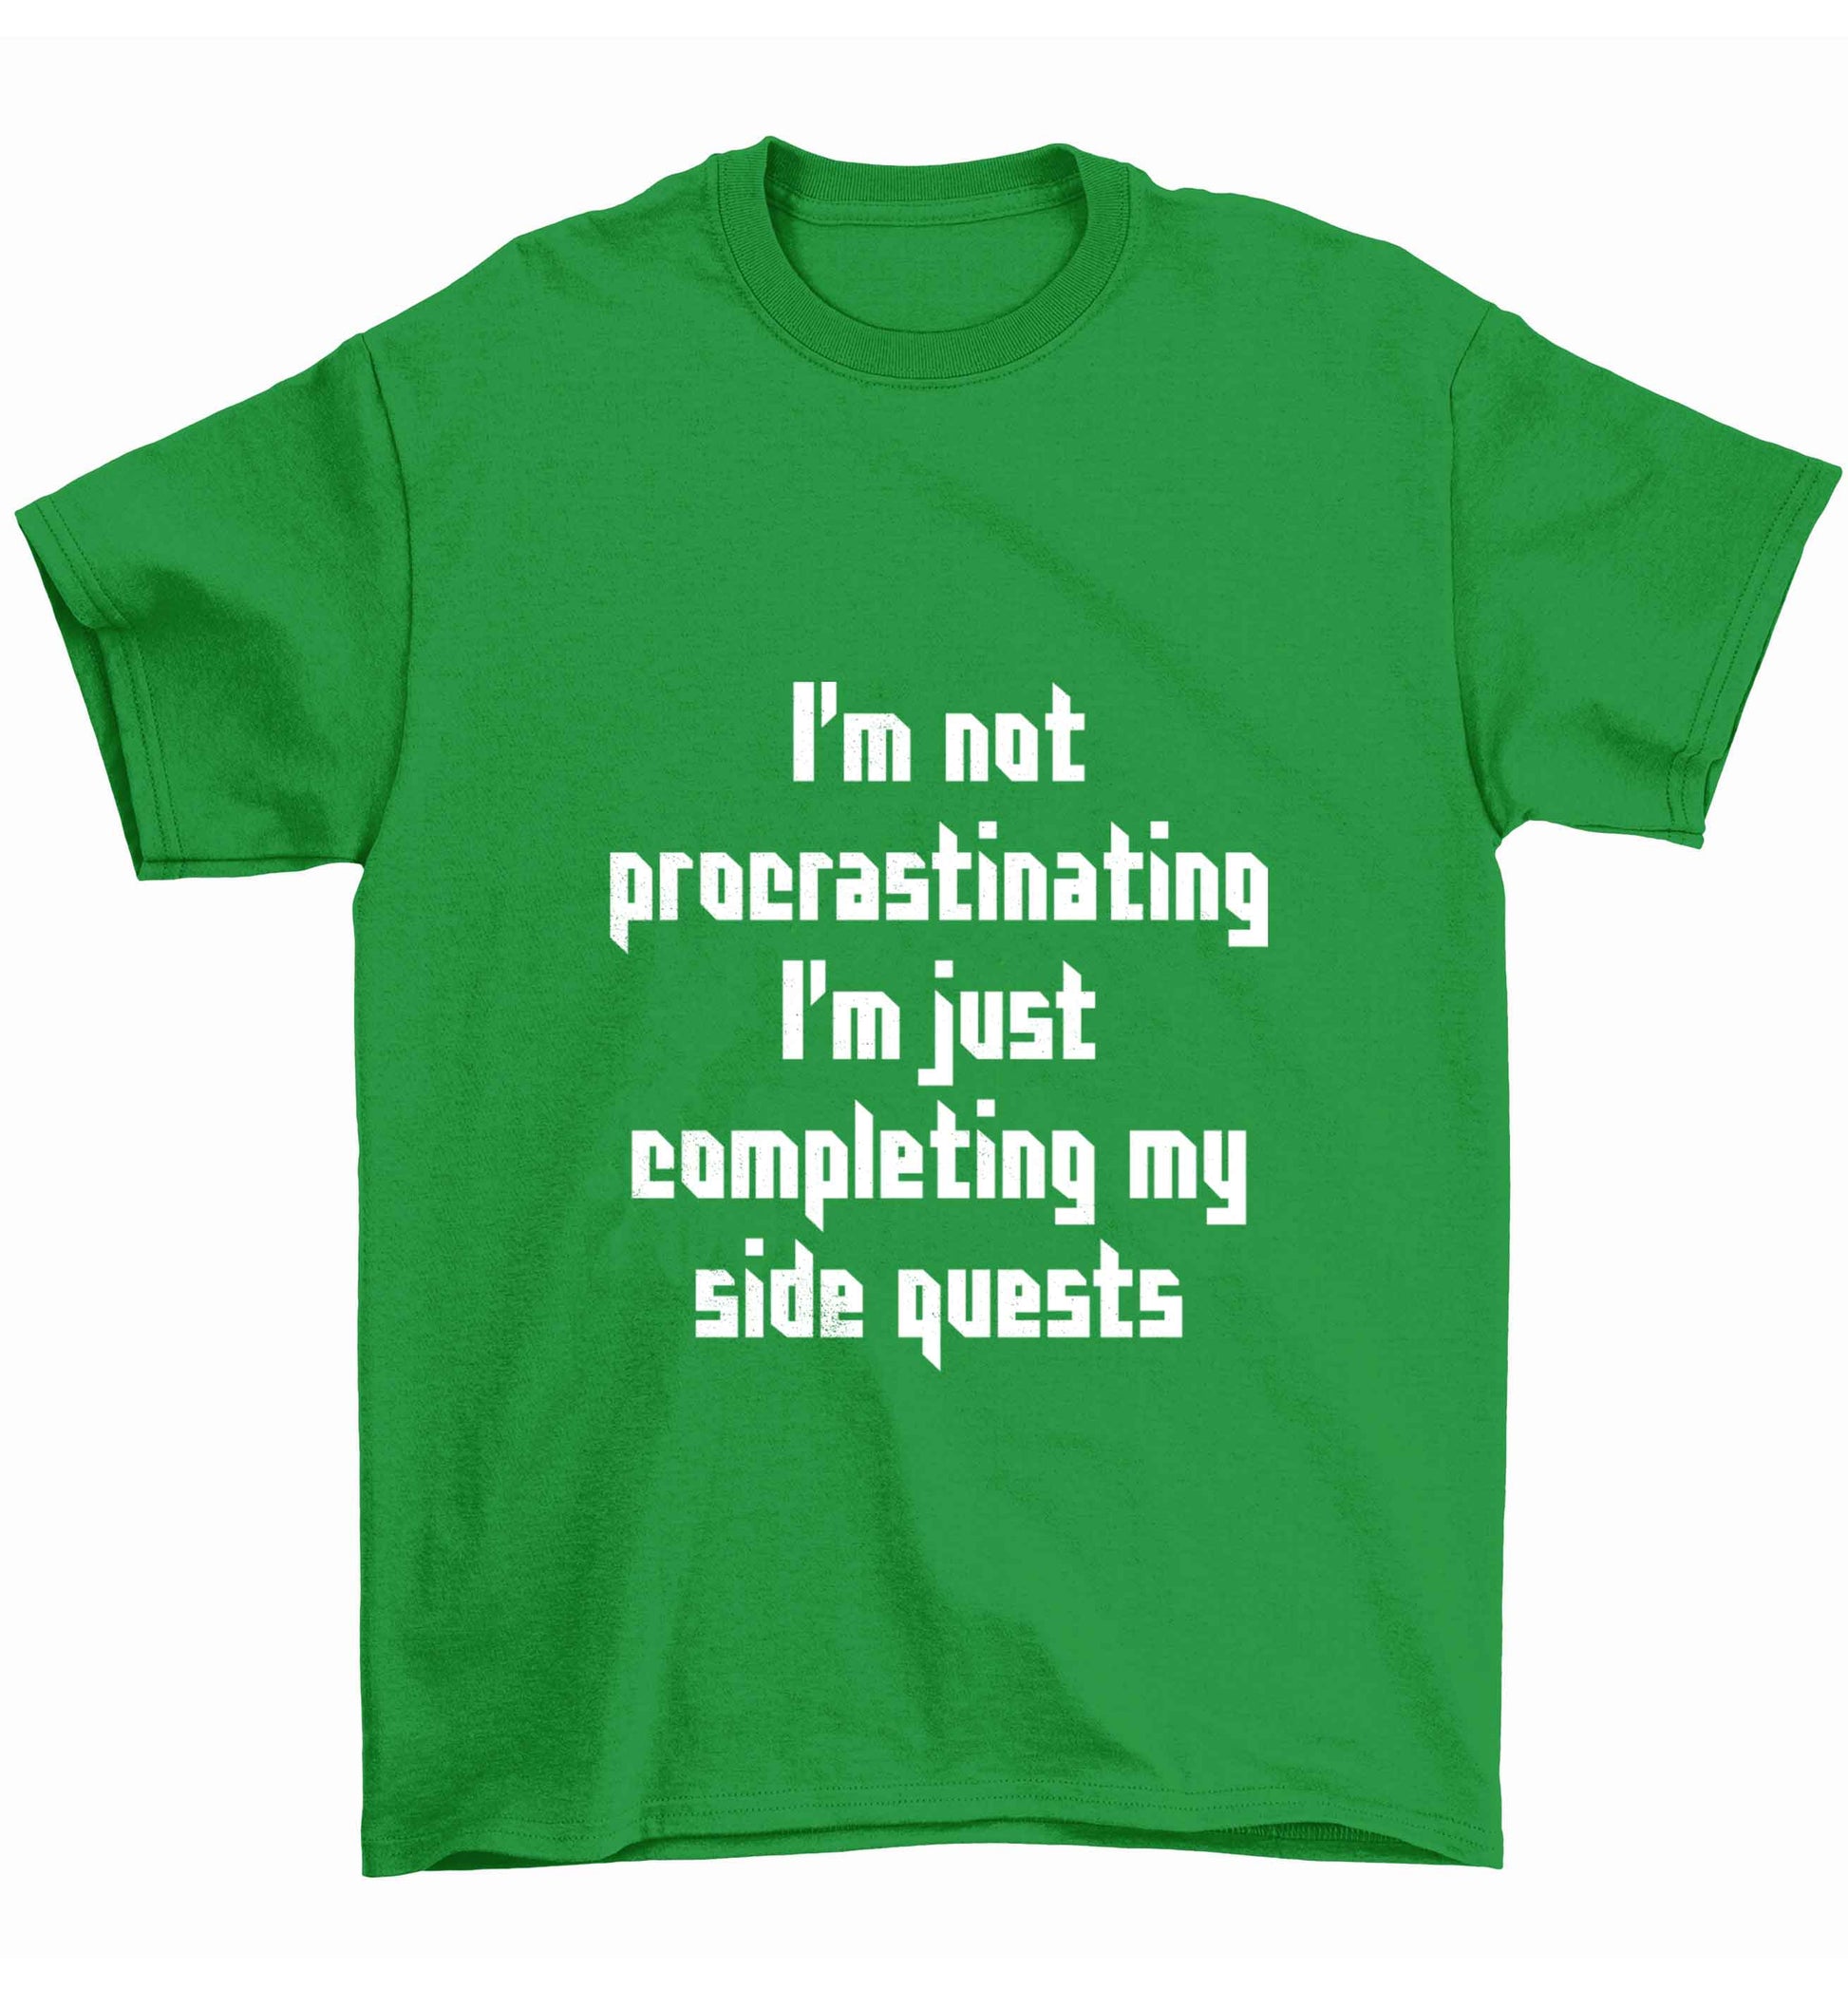 I'm not procrastinating I'm just completing my side quests Children's green Tshirt 12-13 Years